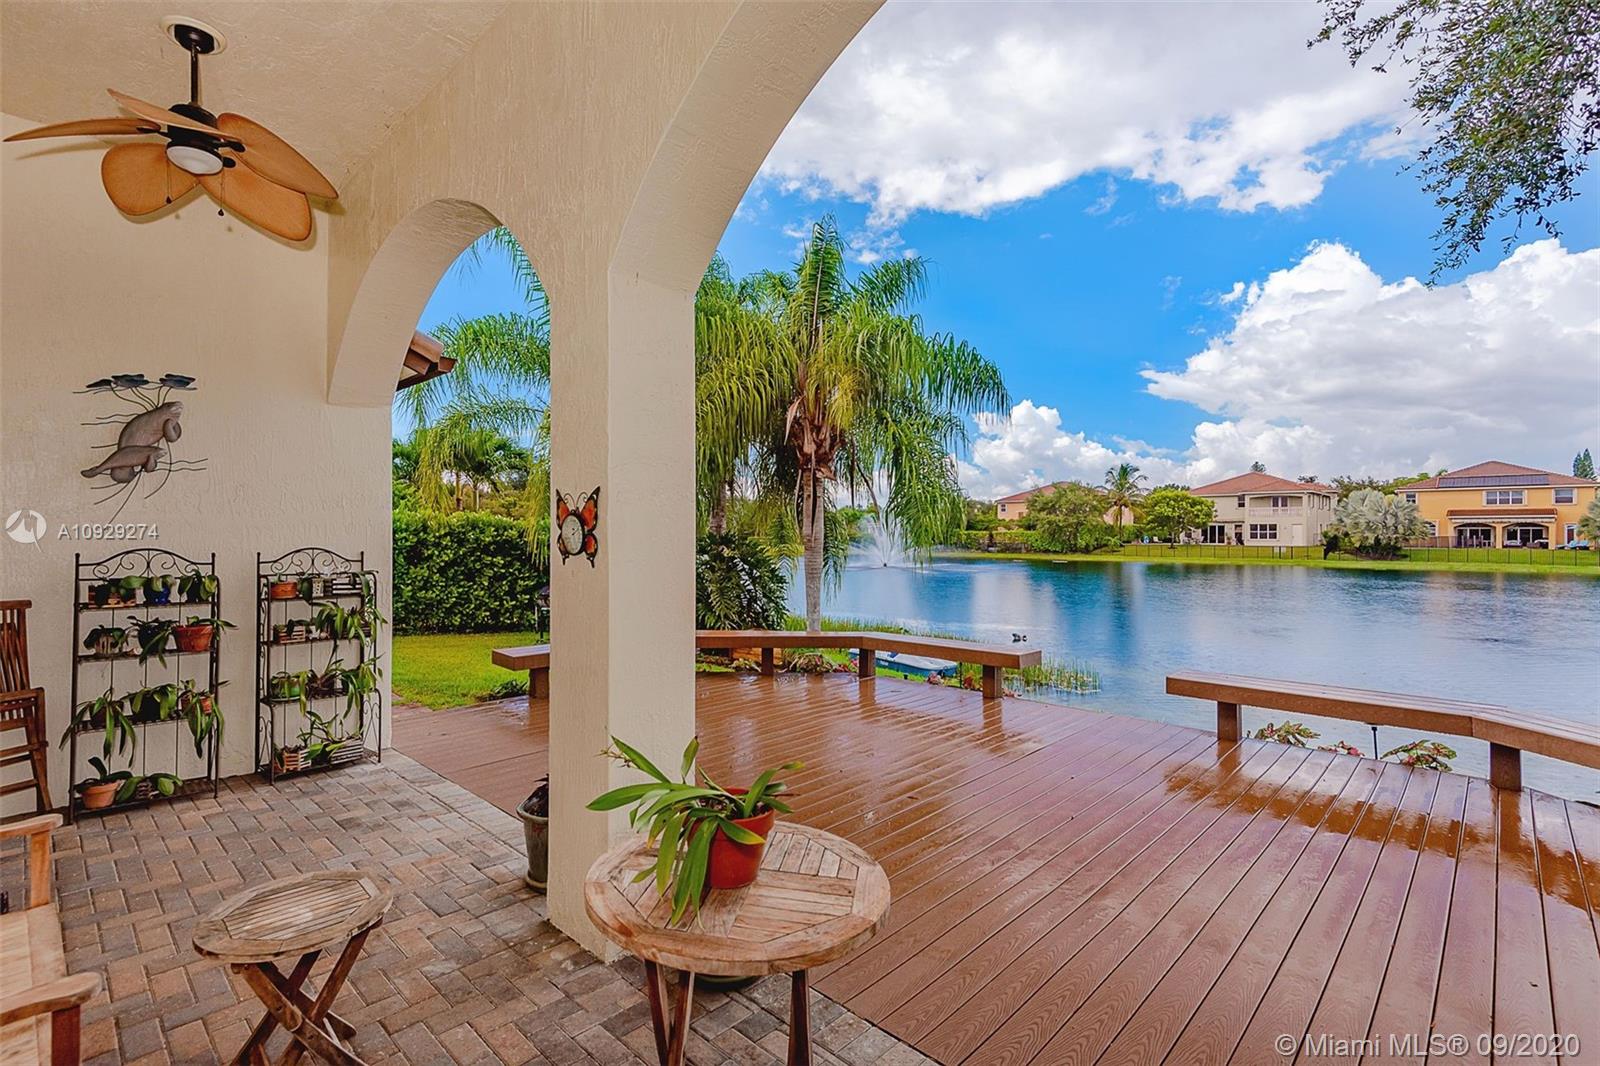 Expansive Lake view, enjoy those sunsets and sangrias!